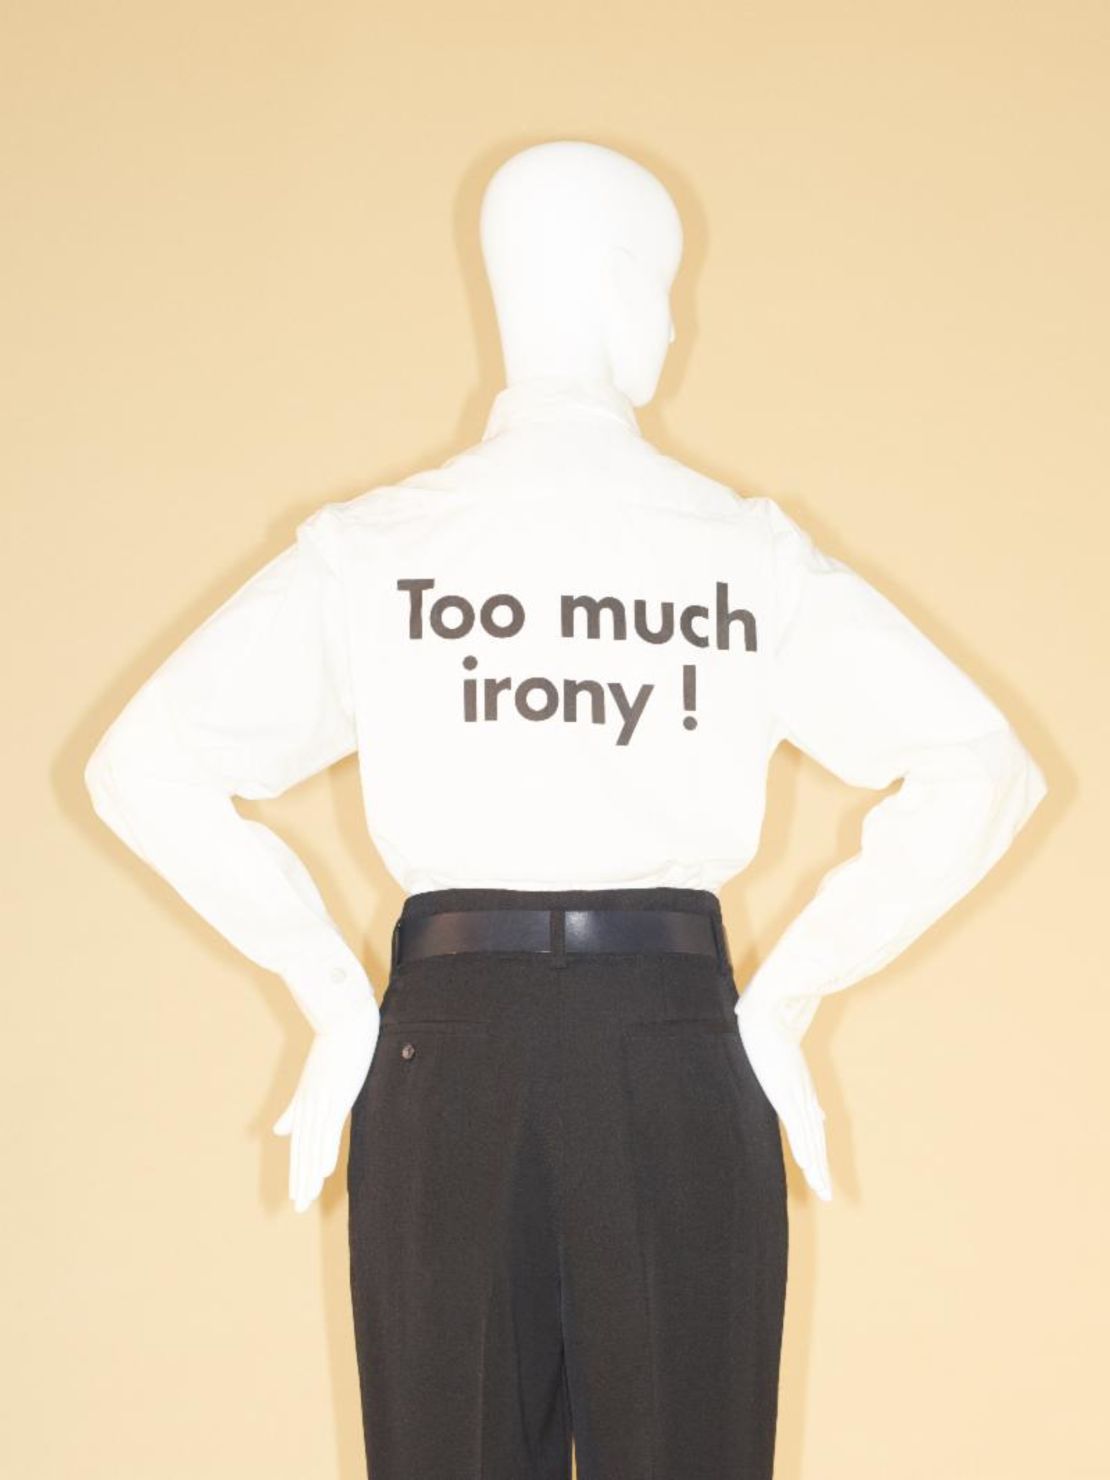 Shirt, Franco Moschino (Italian, 1950--1994) for House of Moschino (Italian, founded 1983), spring/summer 1991
Image courtesy of The Metropolitan Museum of Art.